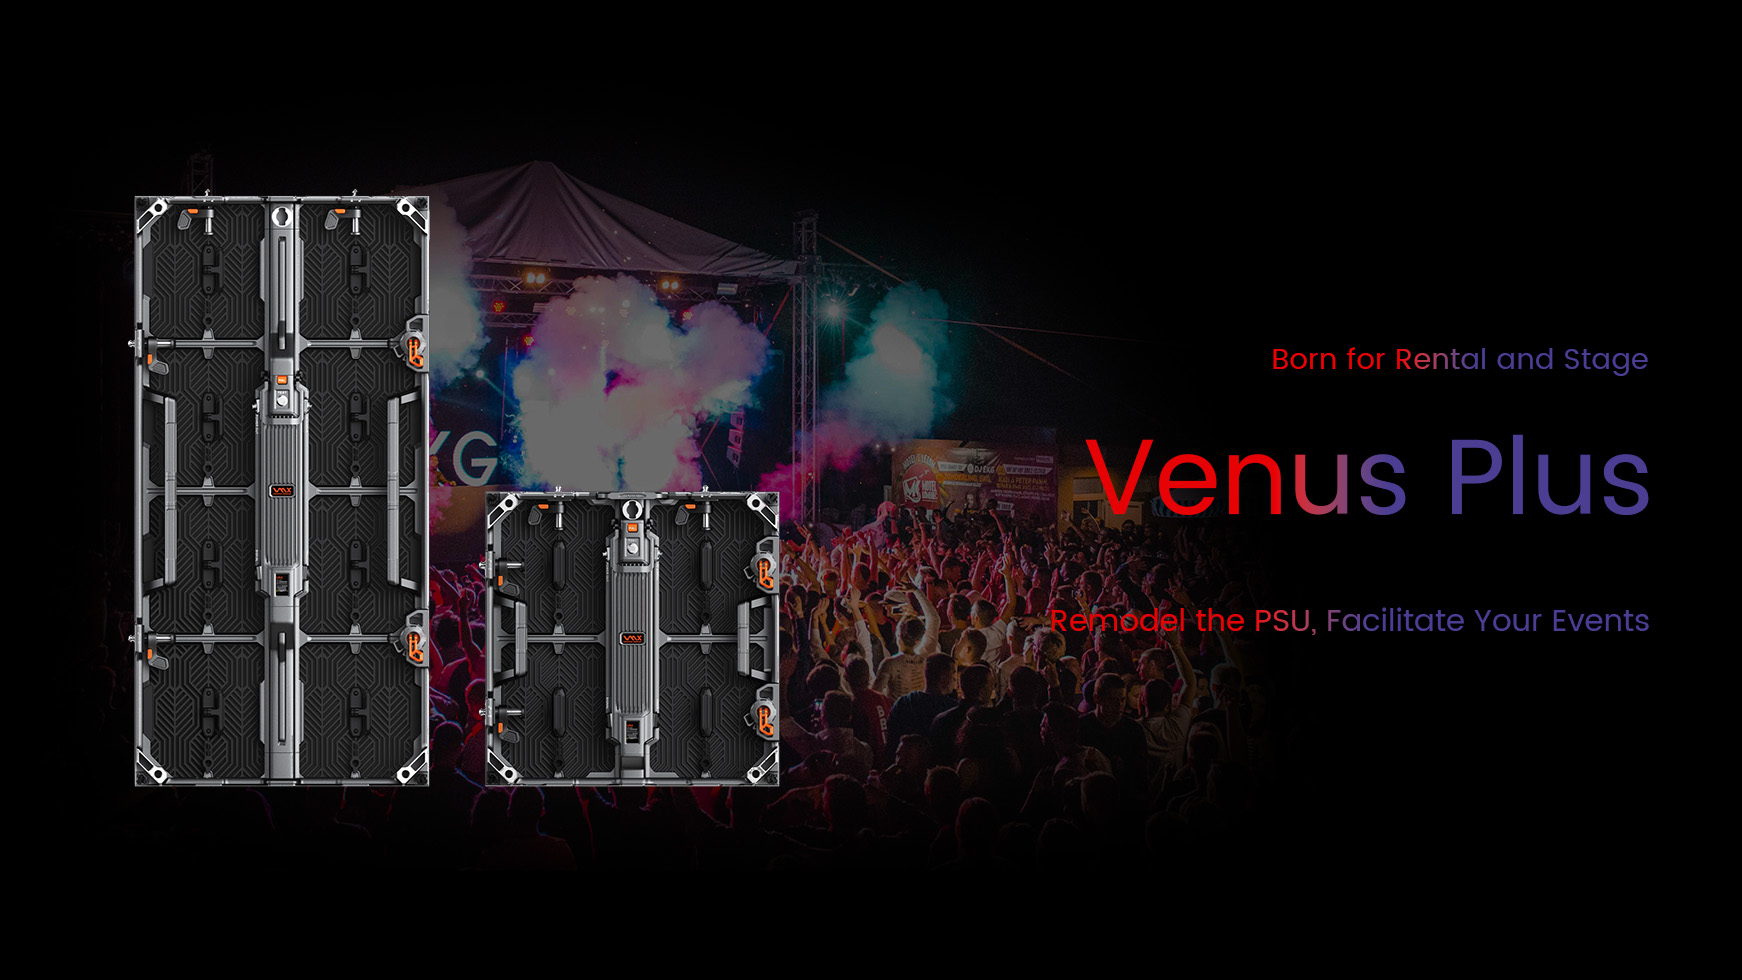 VMX Venus Plus LED display for concerts and tours